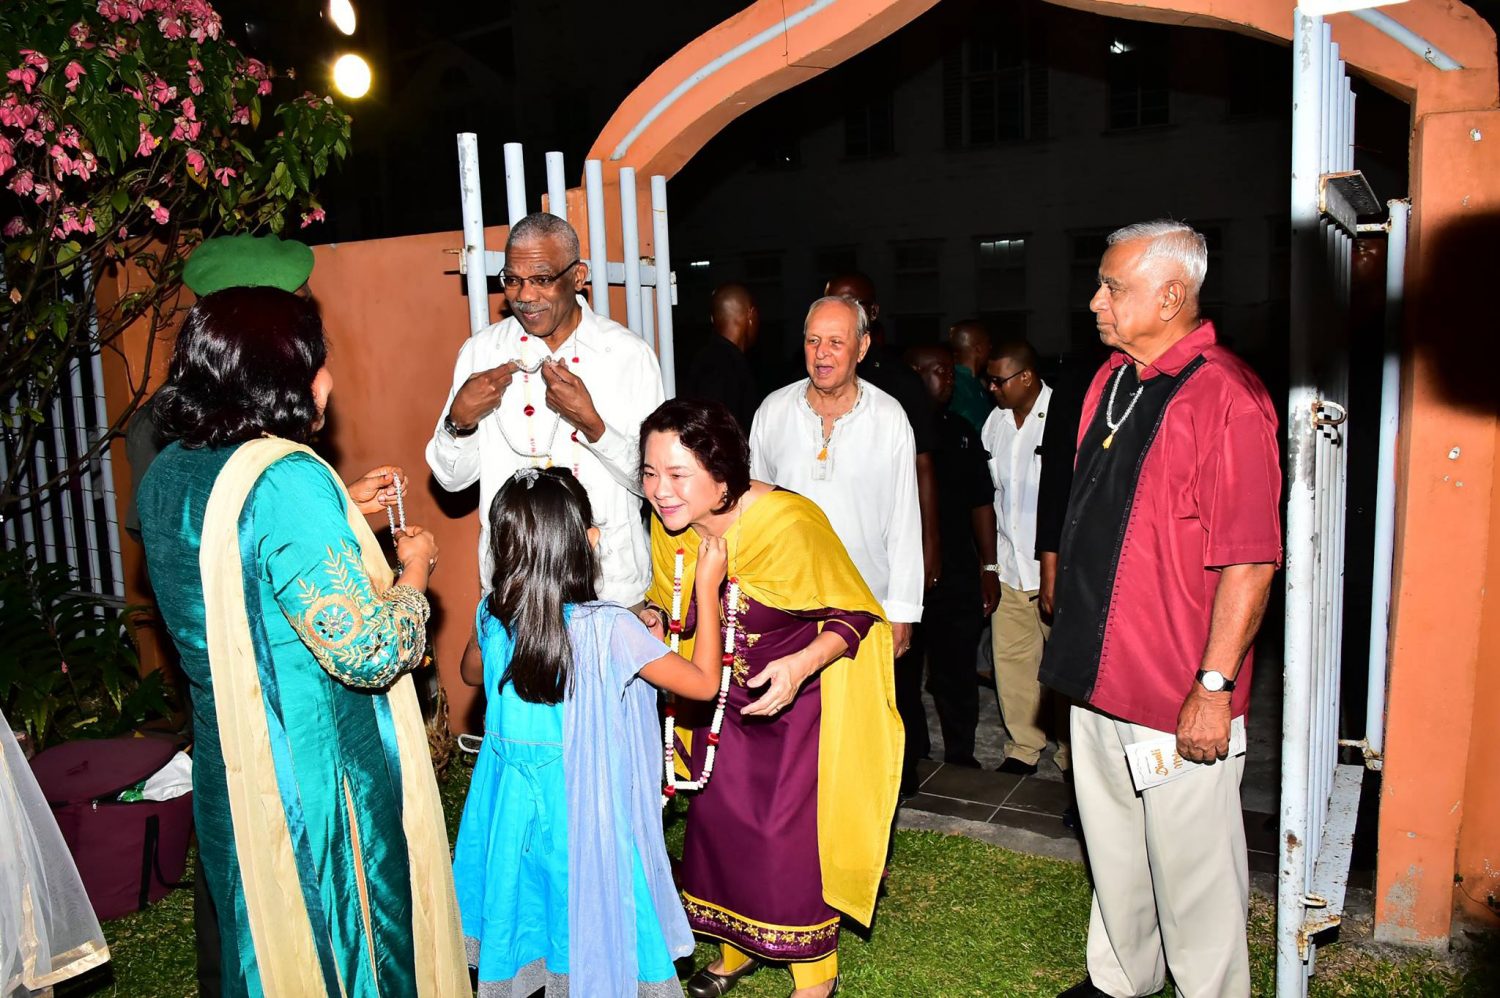 President David Granger and First Lady  Sandra Granger were warmly welcomed upon their arrival at the Indian Monument Gardens. (Ministry of the Presidency photo)